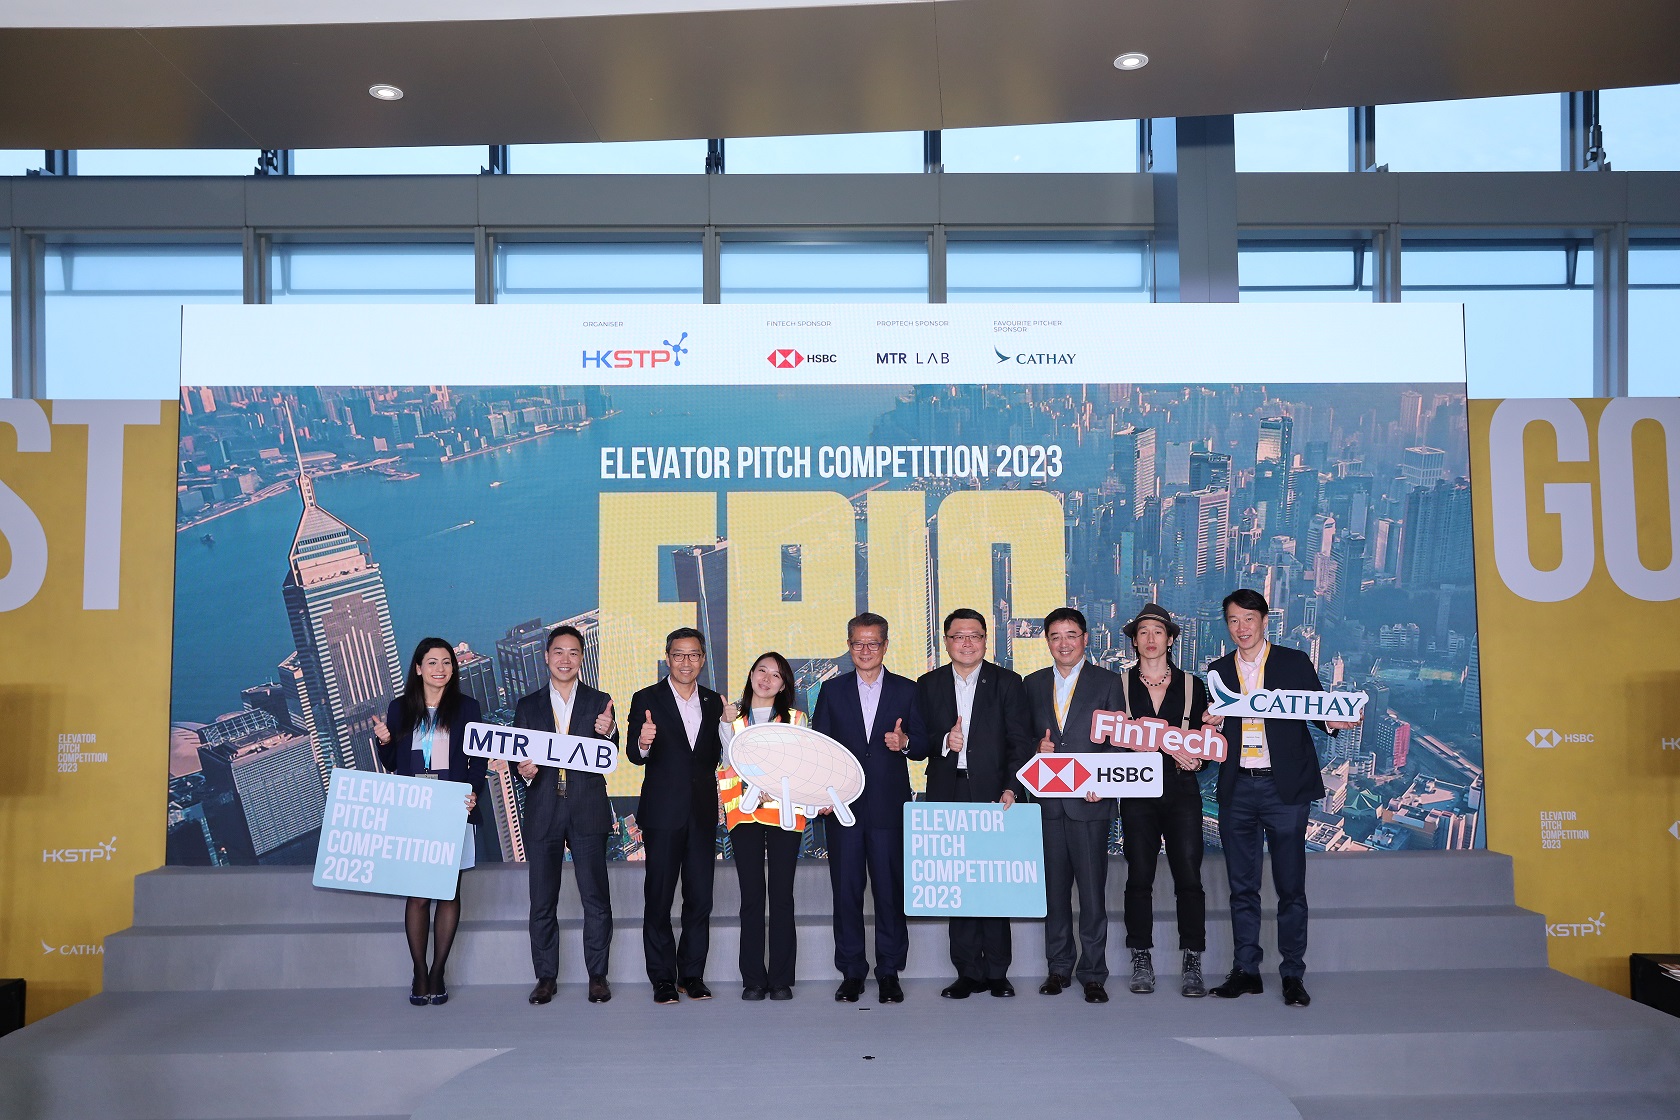 photo4HKSTP CROWNS OVERALL CHAMPION SKYLAND INNOVATION AT EPIC 2023 PITCHING COMPETITION BEATING OVE